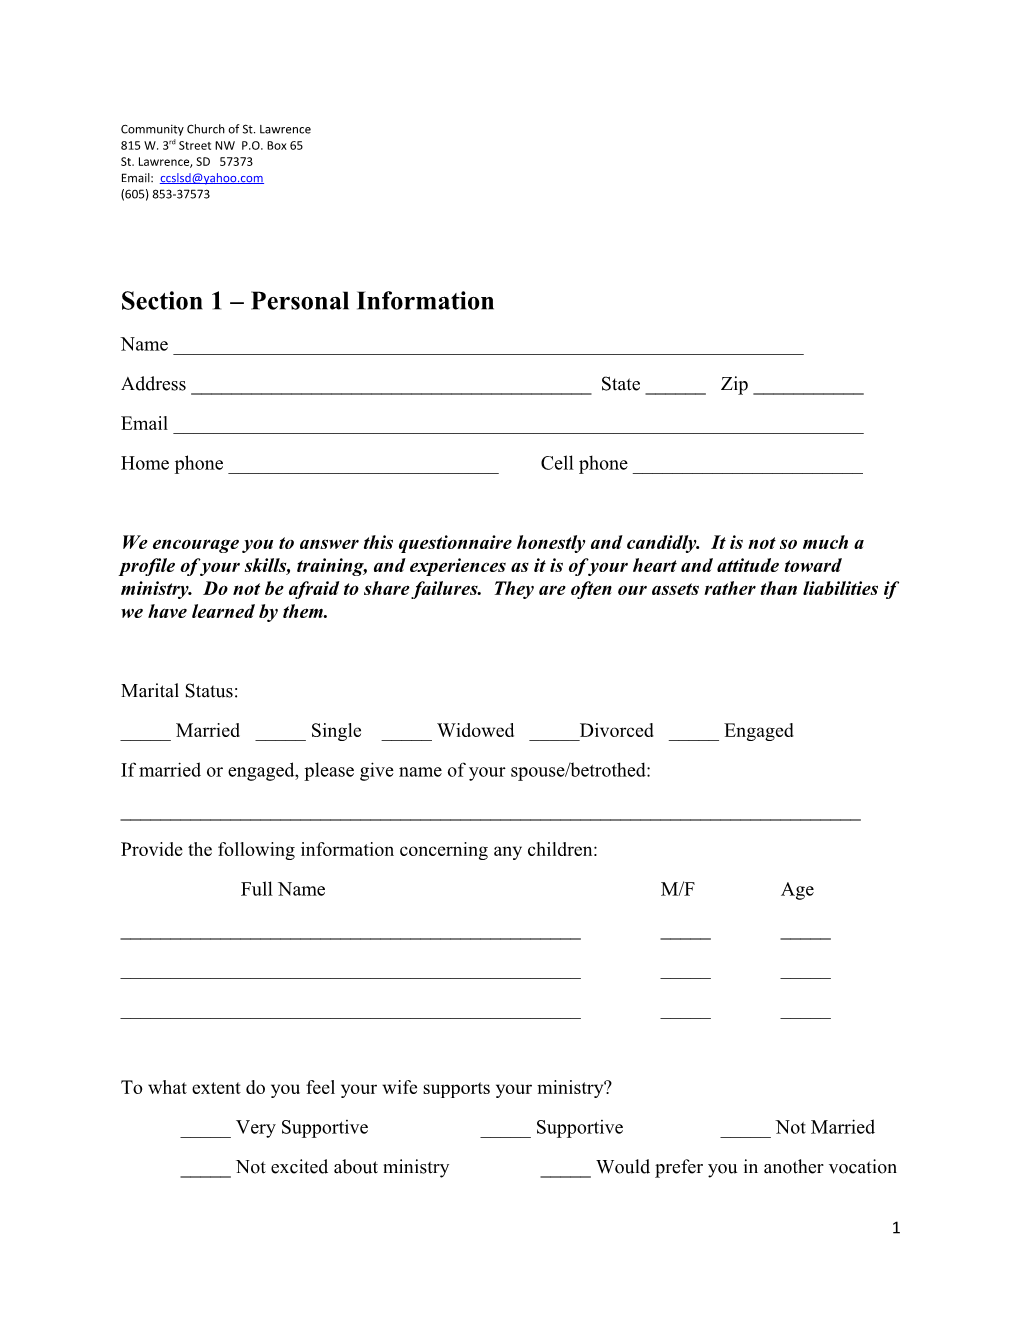 Section 1 Personal Information